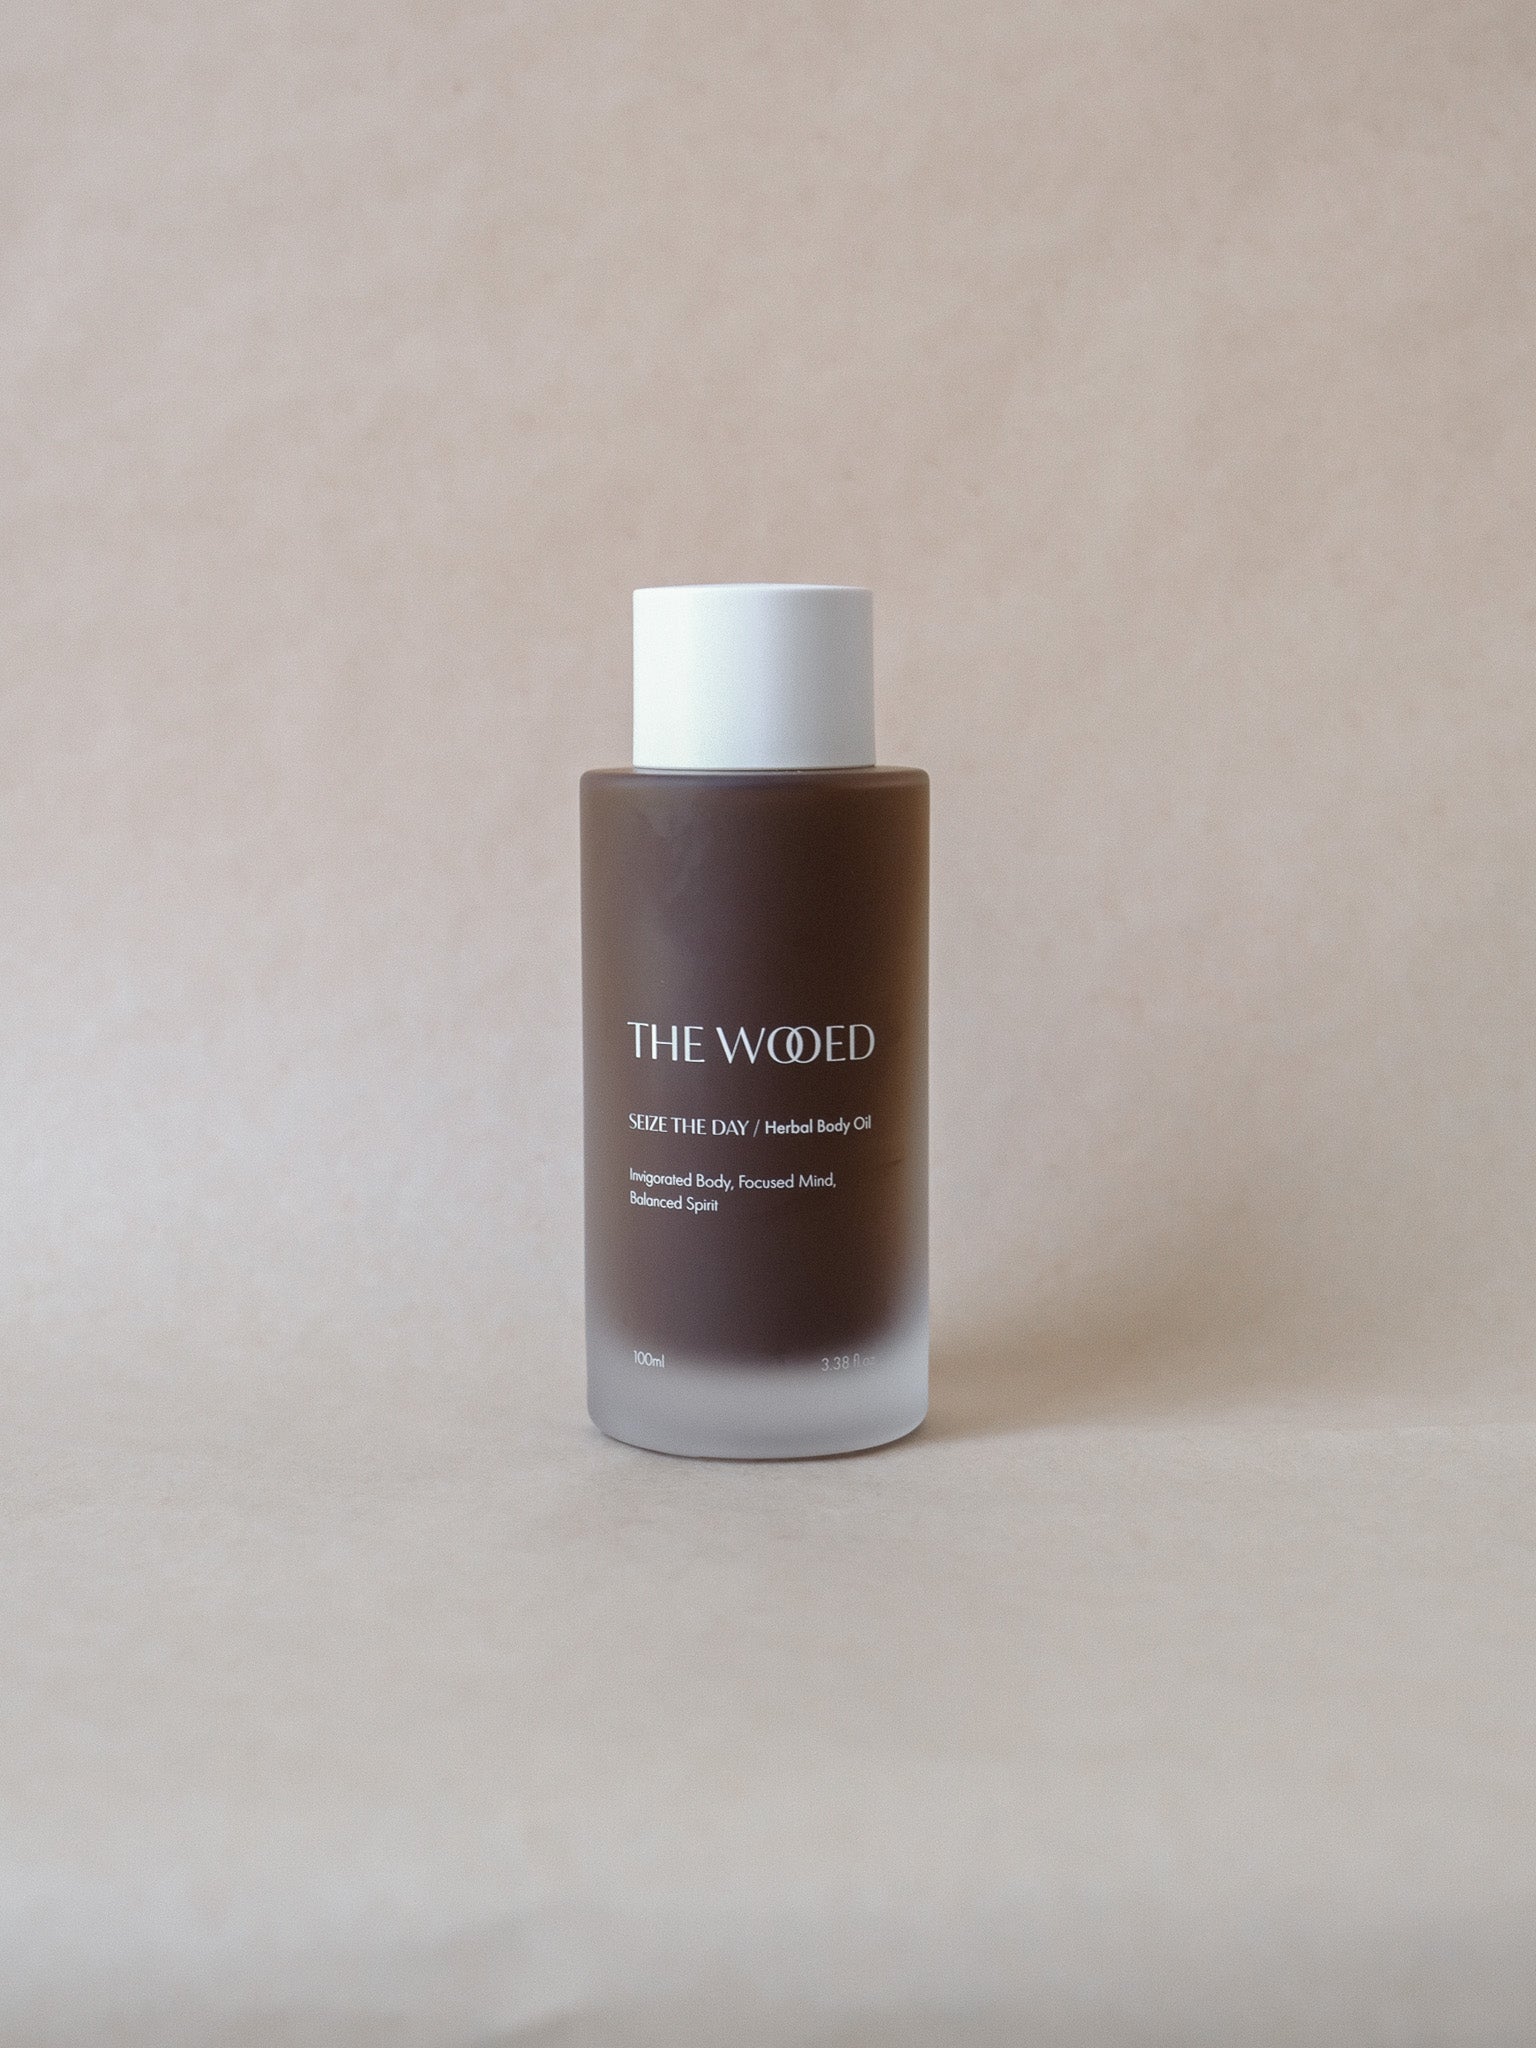 The Wooed Seize The Day Body Oil